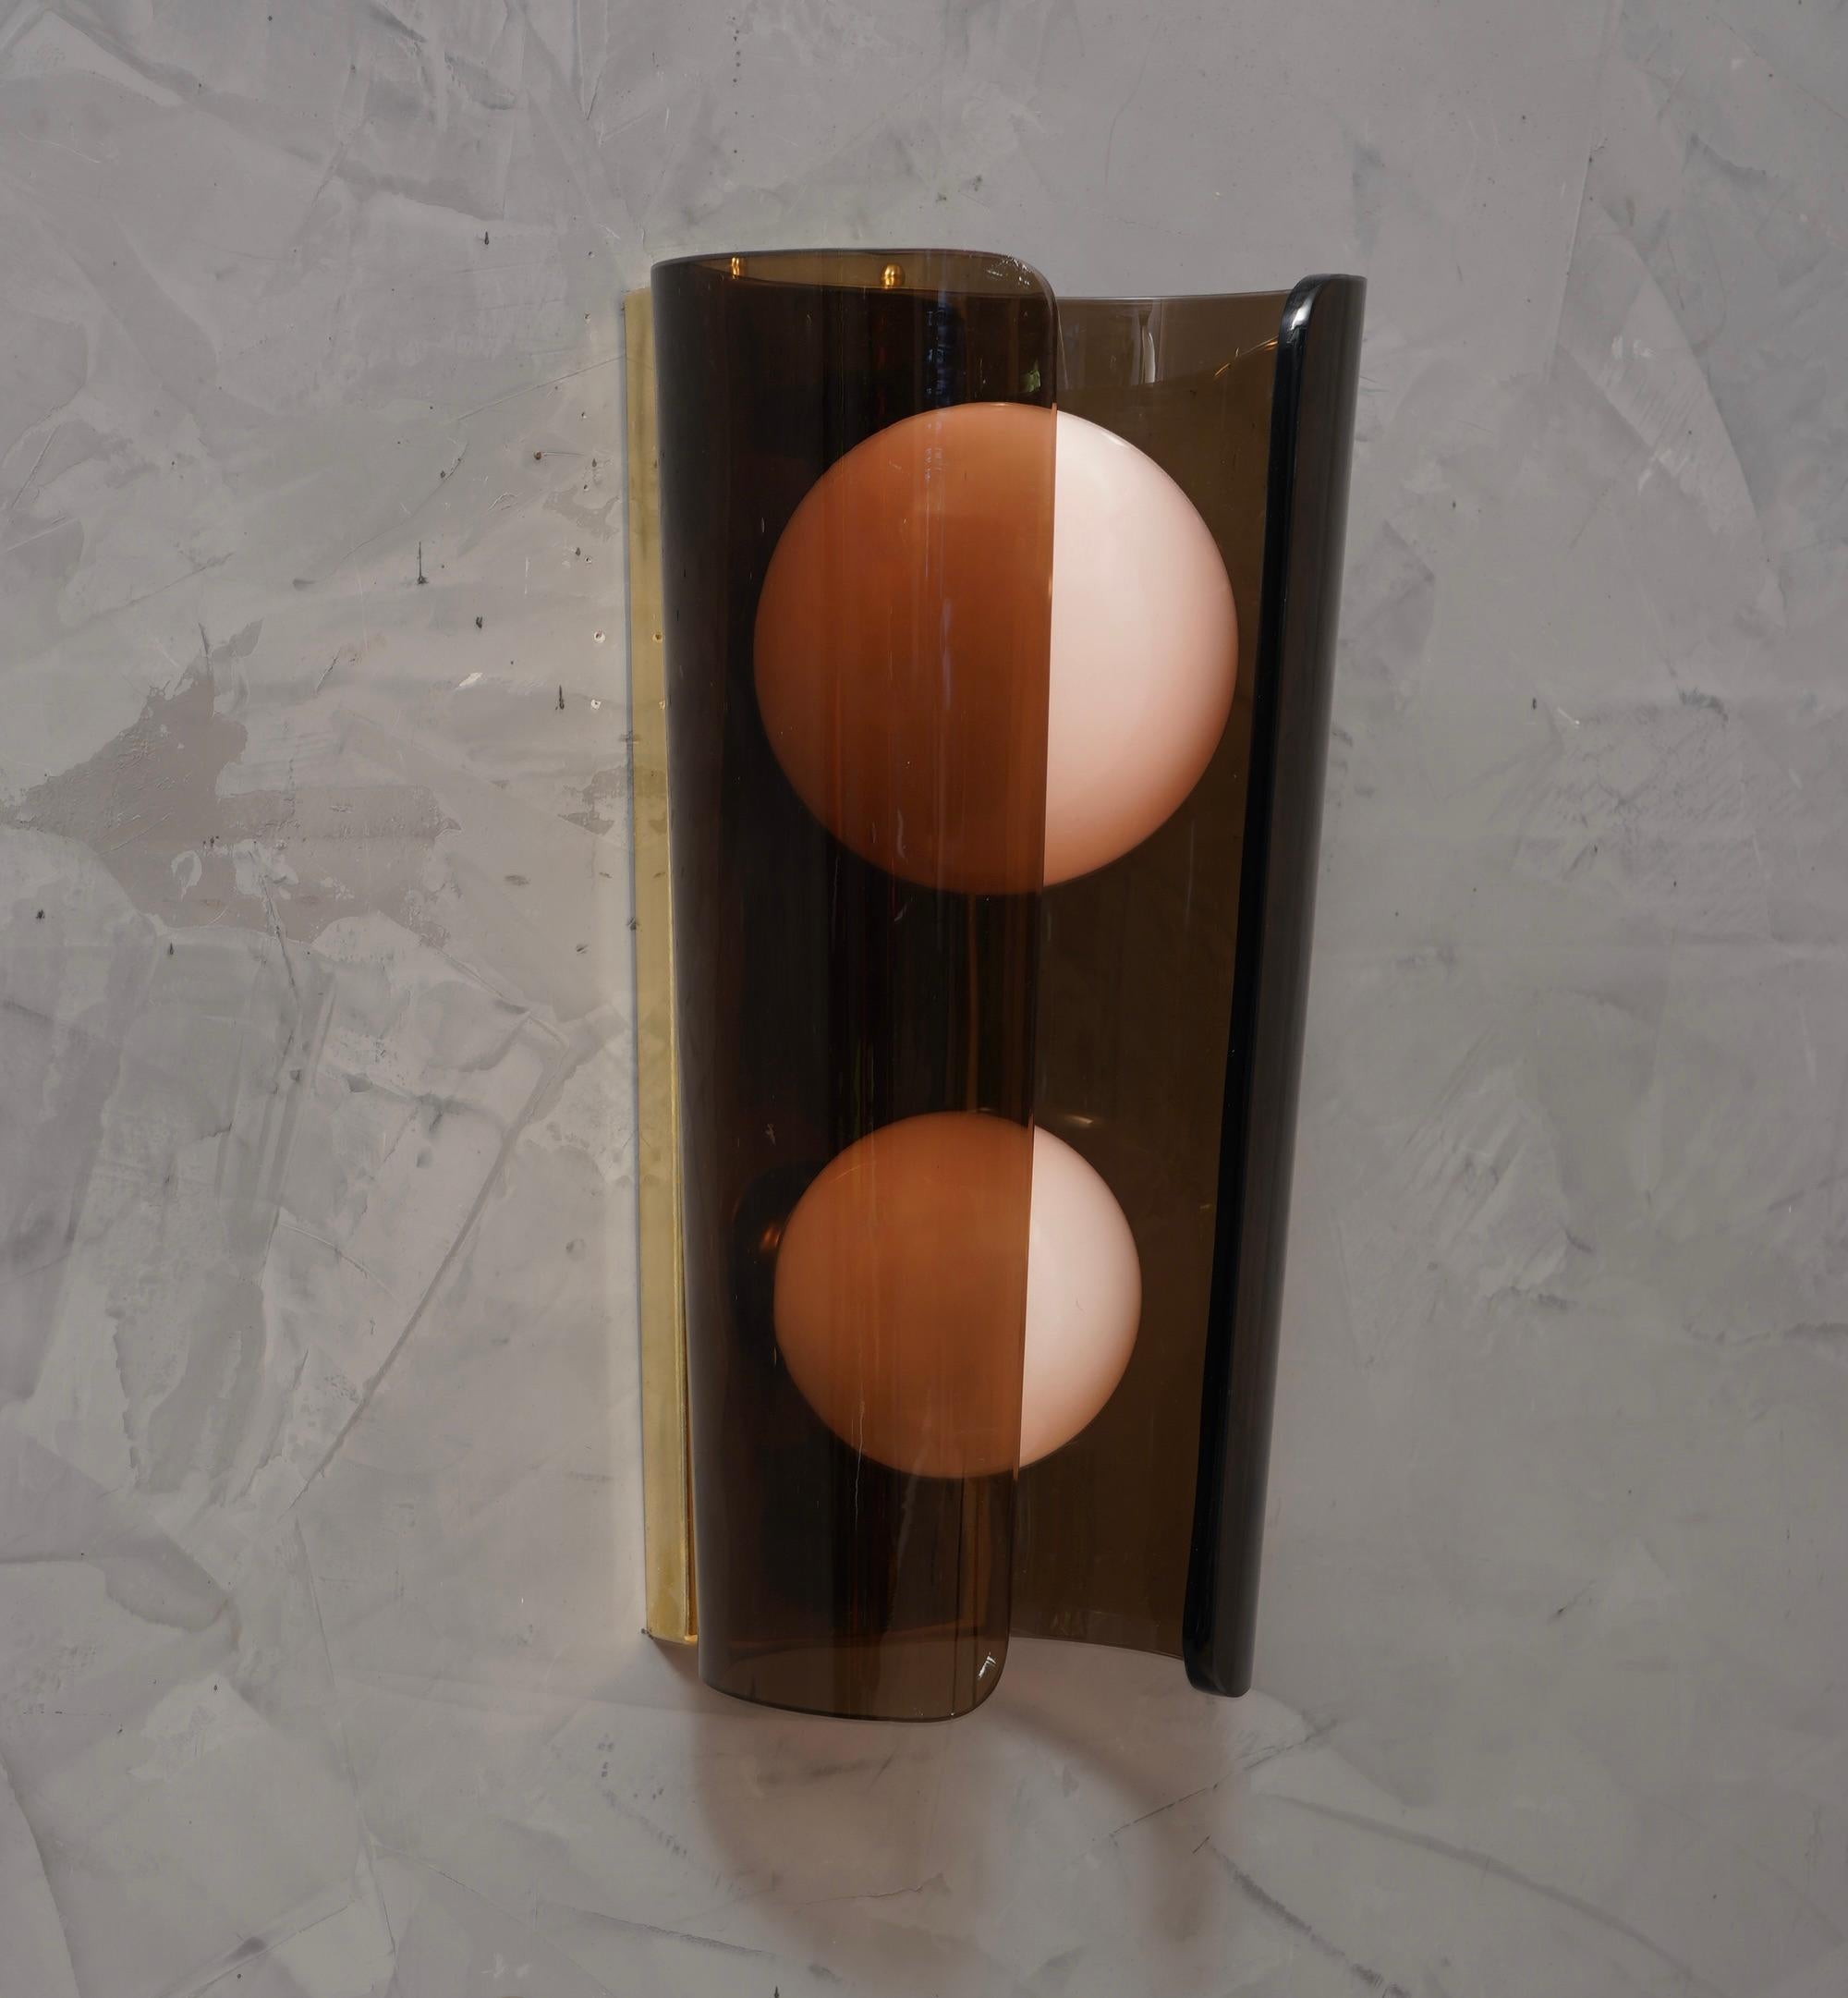 The rounded shape of the brown glass creates a very nice contrast with the two pale pink glass spheres, a unique and original design for this Murano wall light.

The applique is formed by a rectangular brass structure, to which a large and thick